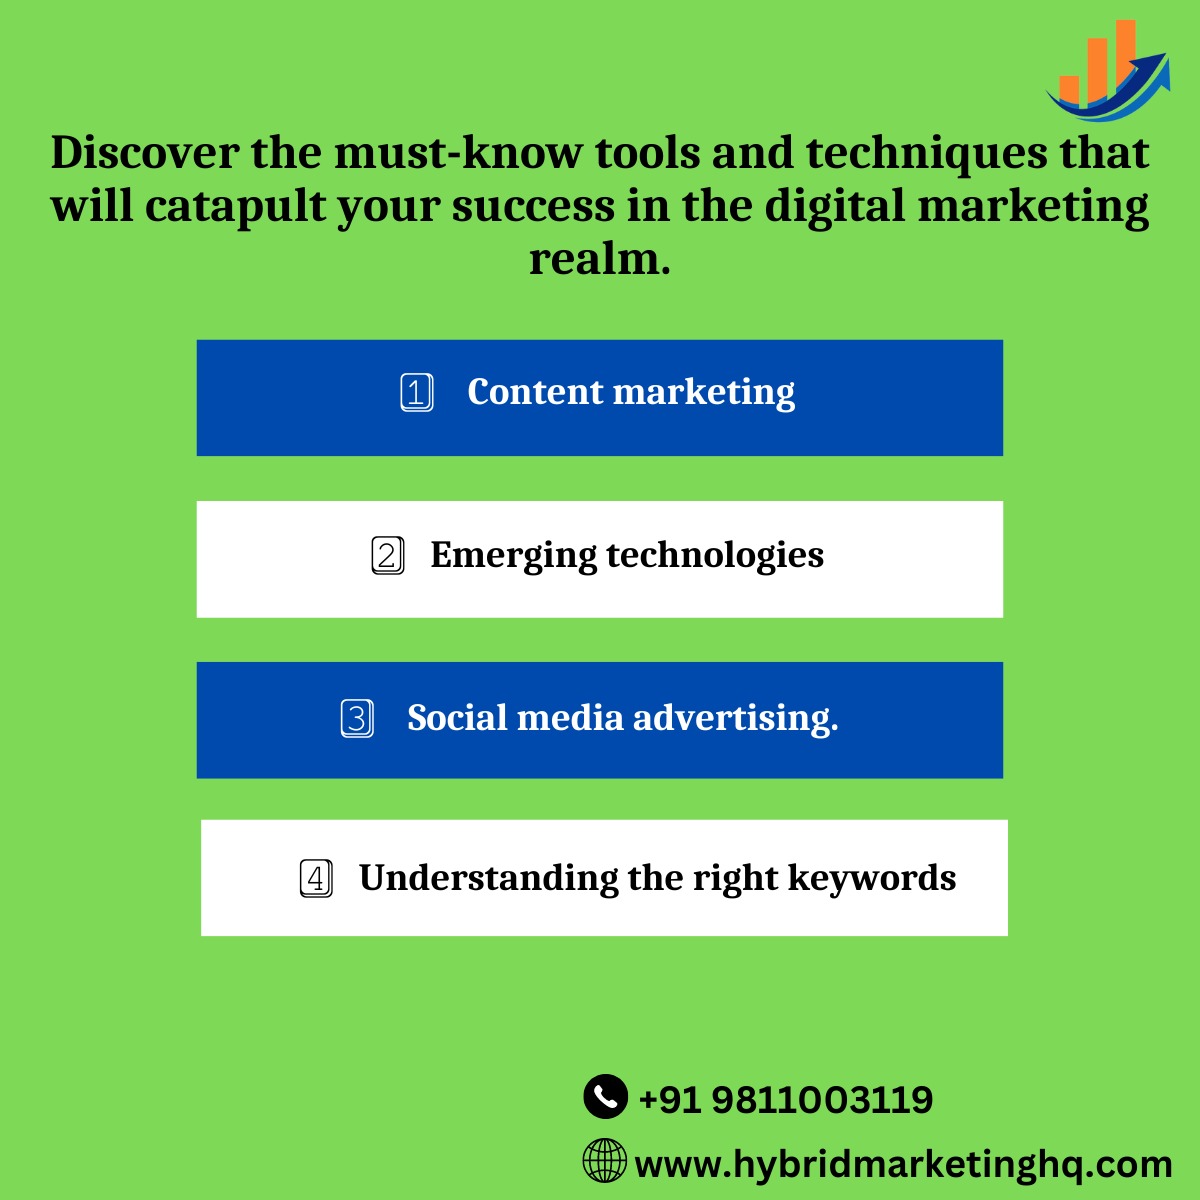 📣 Attention all digital marketers! 🚀 If you want to take your online presence to the next level, this is the post you've been waiting .
.
.
.
.
.
.
.
#DigitalMarketingEssentials #ToolsForSuccess #DigitalMarketingTips #StayAheadInTheDigitalRealm #MasteringDigitalMarketing